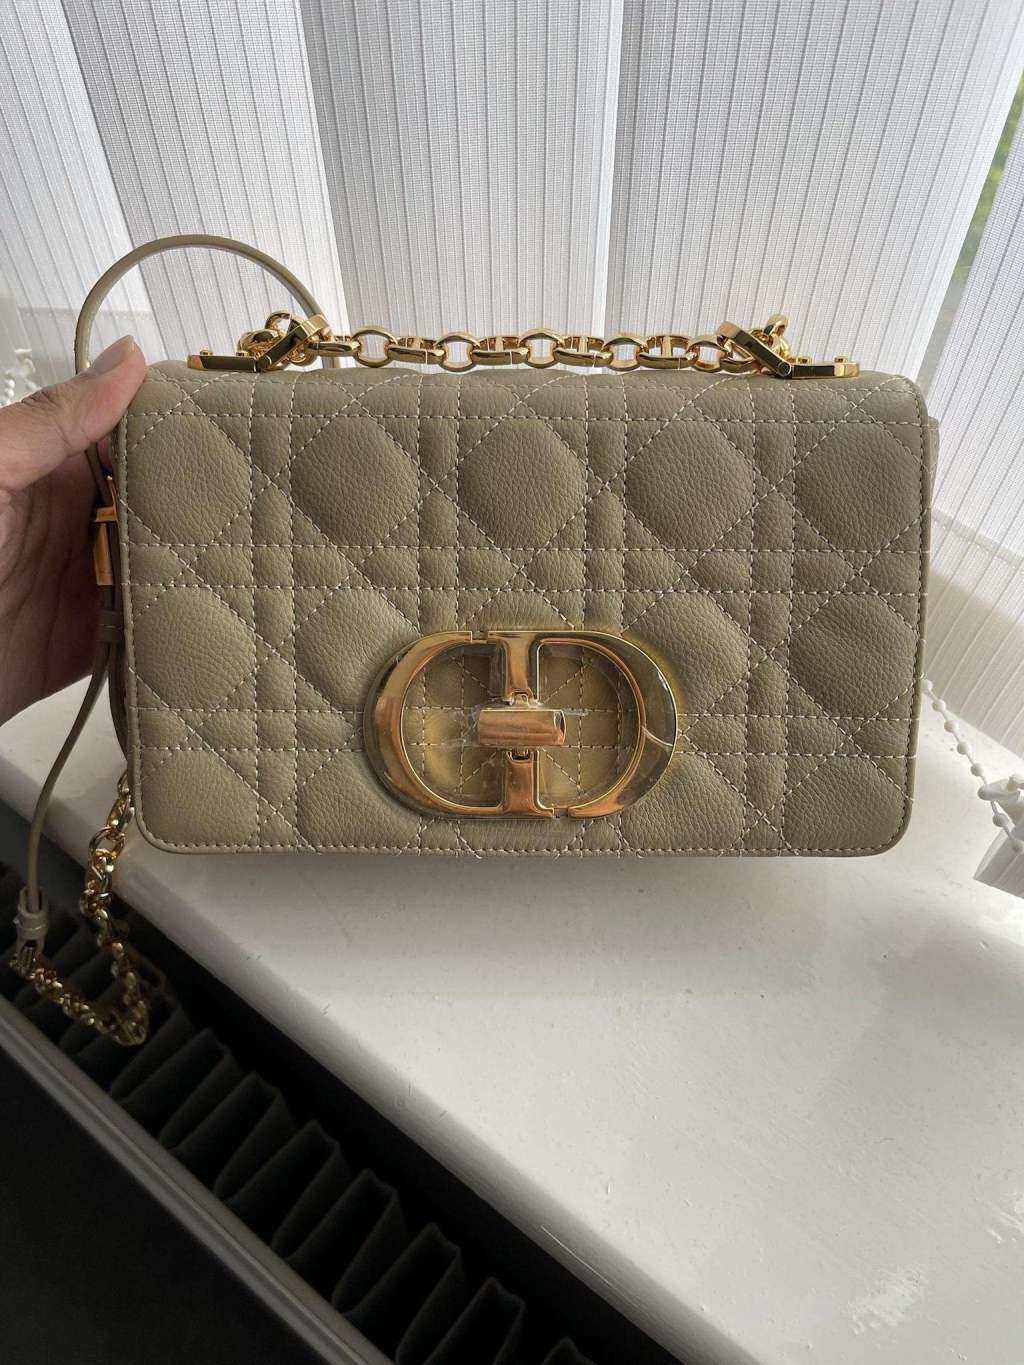 [REVIEW] DIOR CARO SMALL BEIGE FROM XIYANGYANG FACTORY